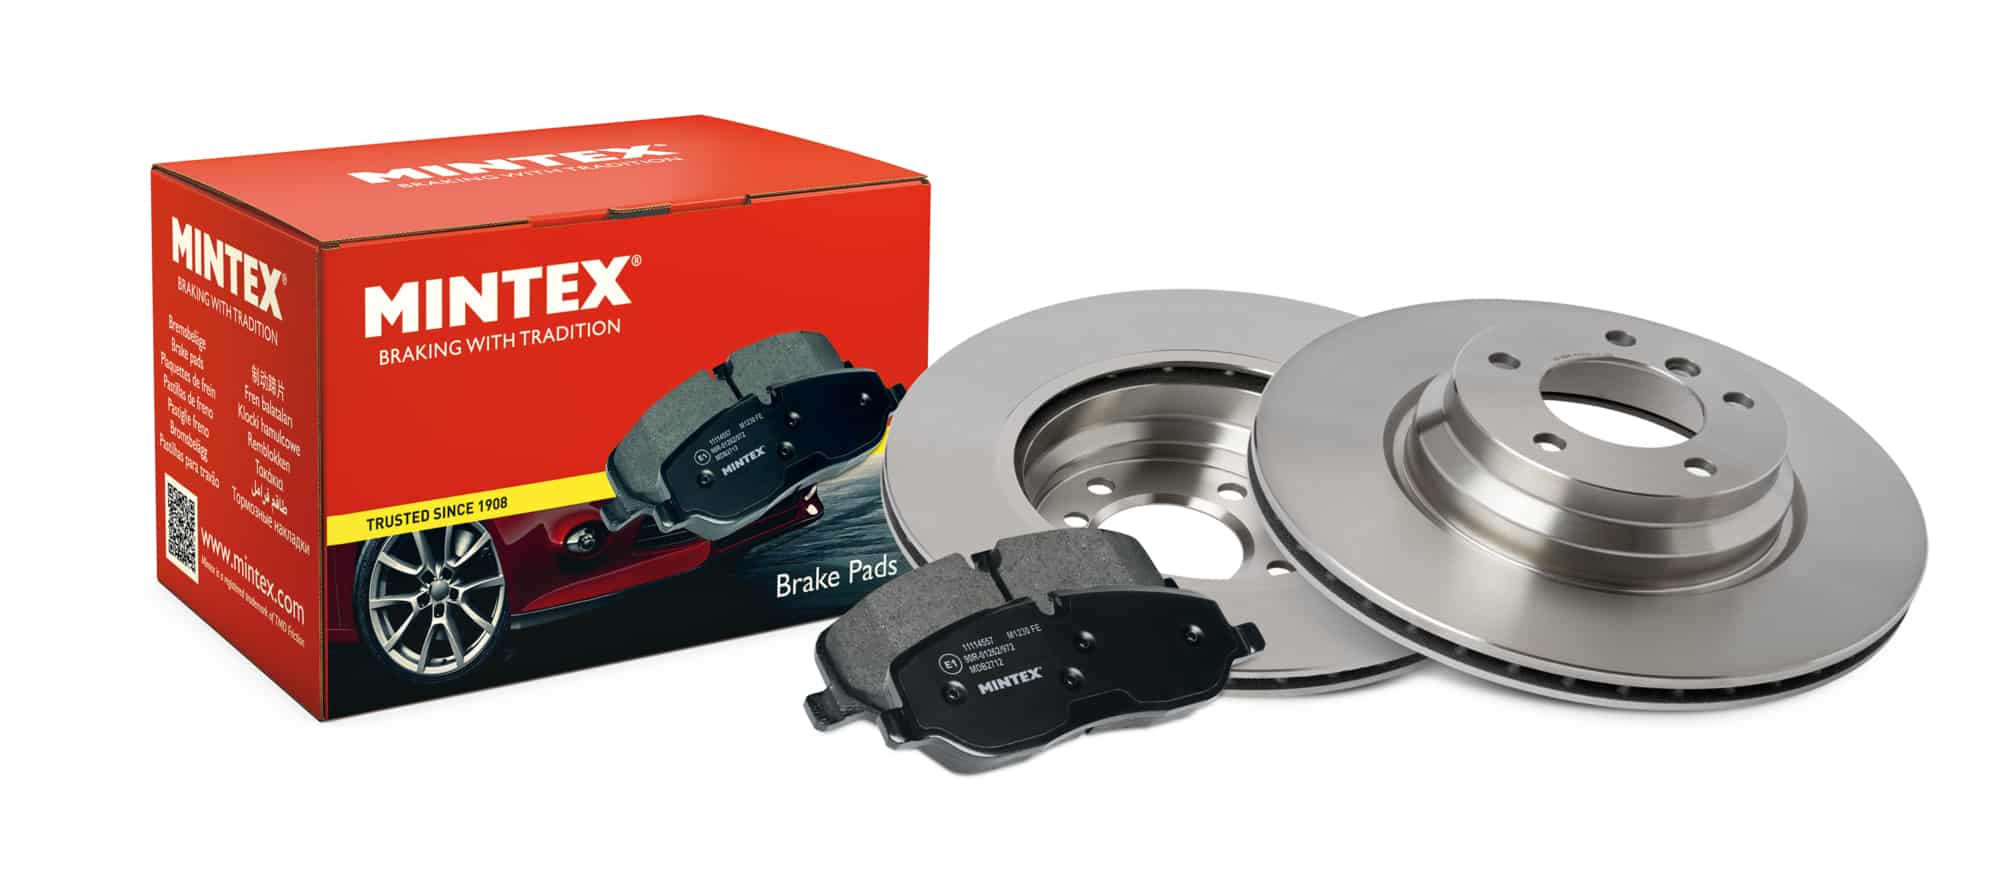 Mintex has expanded its disc and pad lines